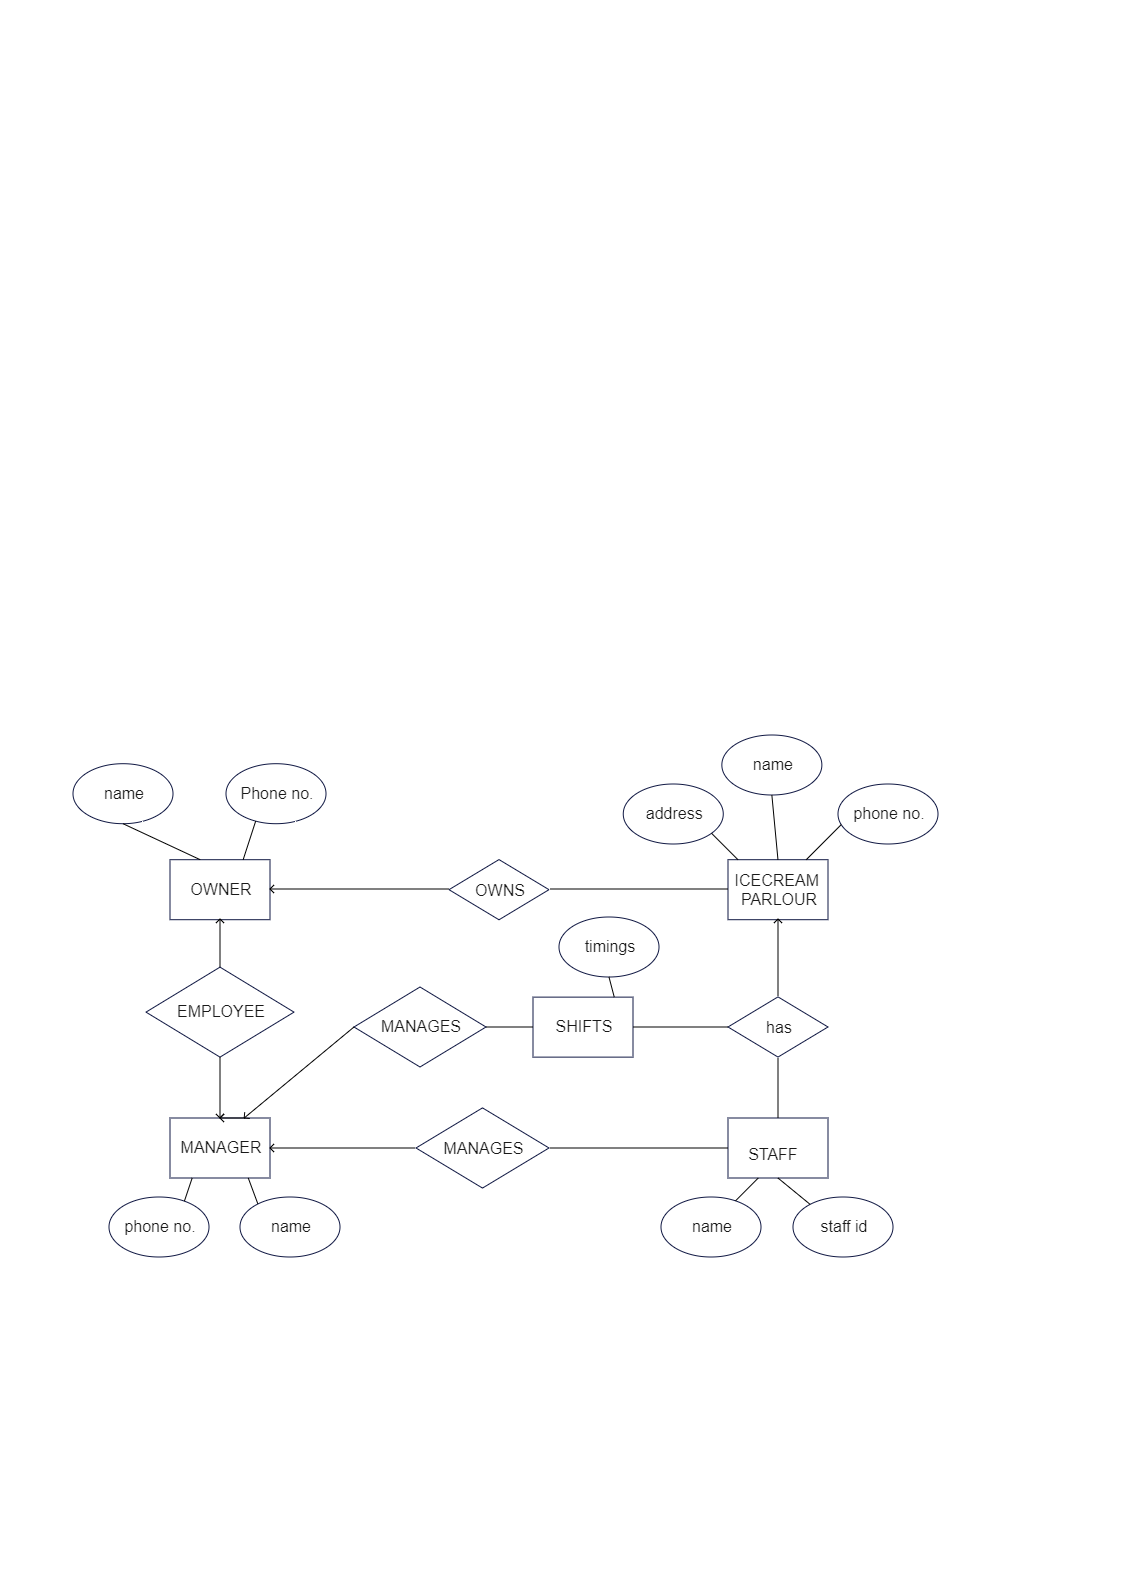 Ice-cream store entity-relationship (ER) diagram shows several entities, like Manager, Staff, Customer, Owner, and Ice-Cream Parlor. These entities have several attributes, such as an address, name, phone_number, staff_id, manager_phone_number, employee_n